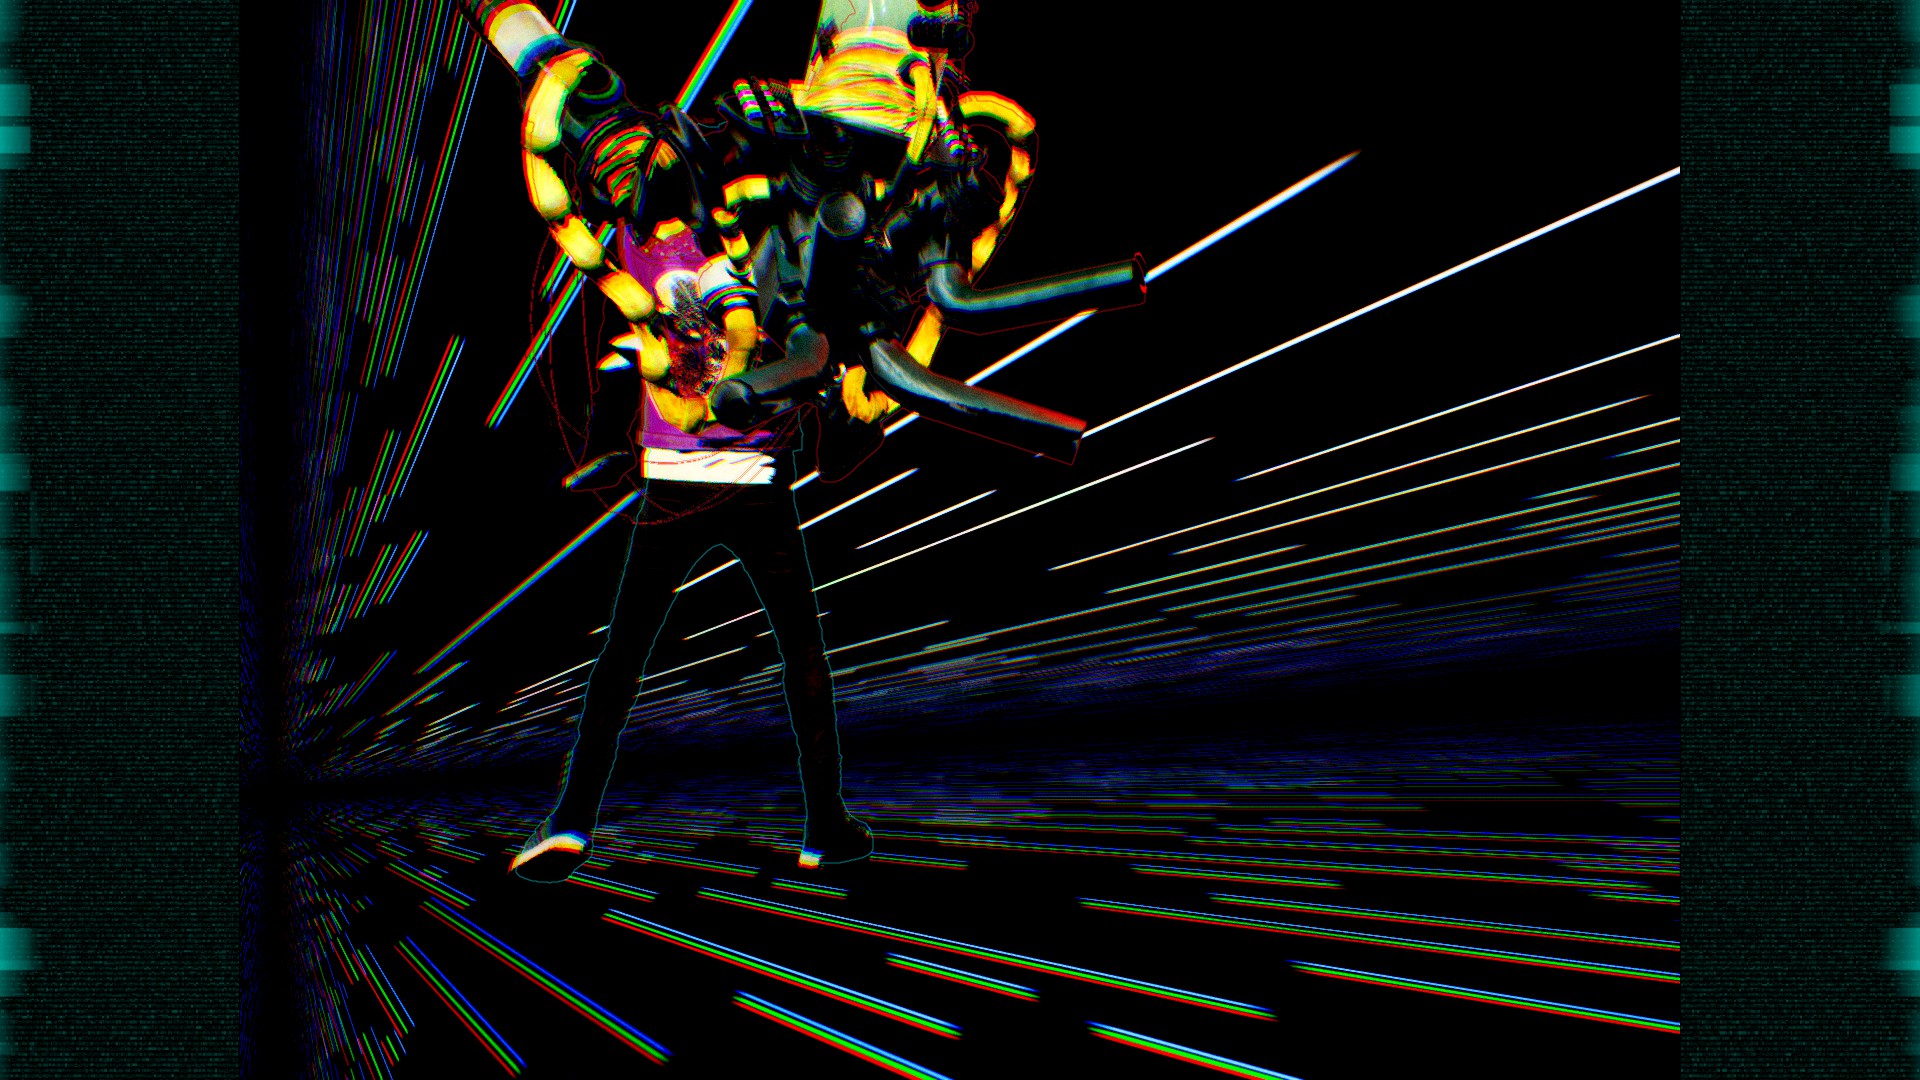 Travis Strikes Again No More Heroes Complete Edition inceleme